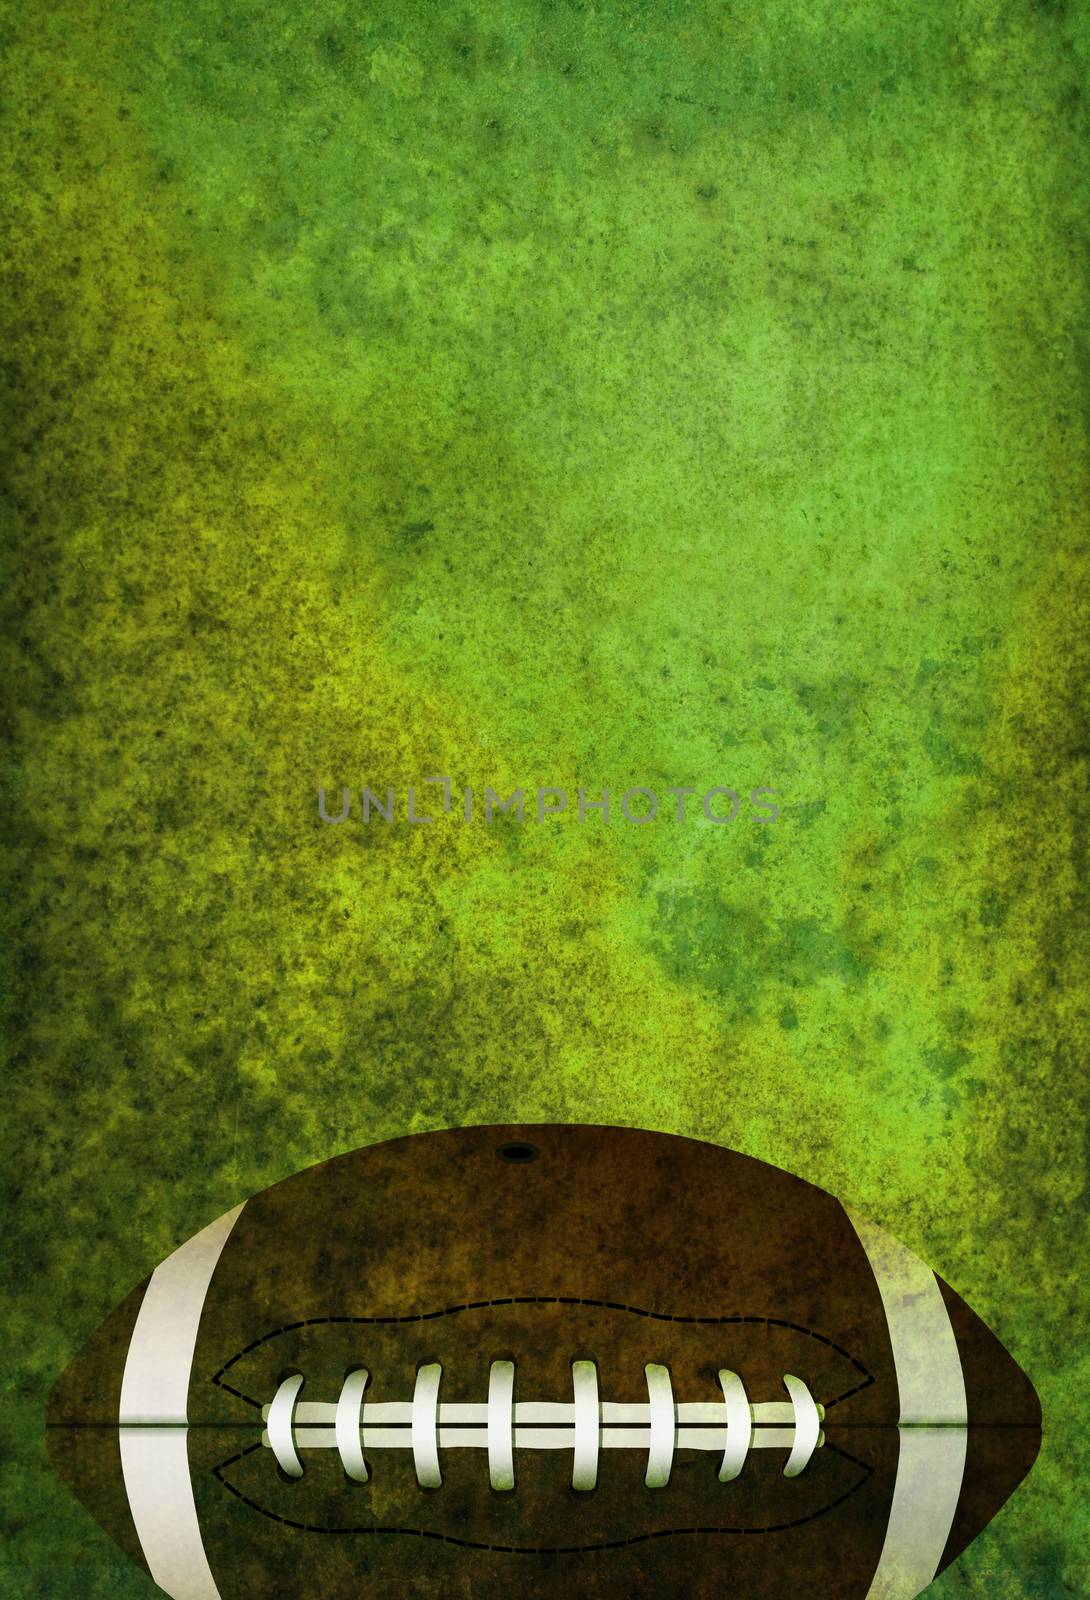 Textured American Football Field Background with Ball by enterlinedesign